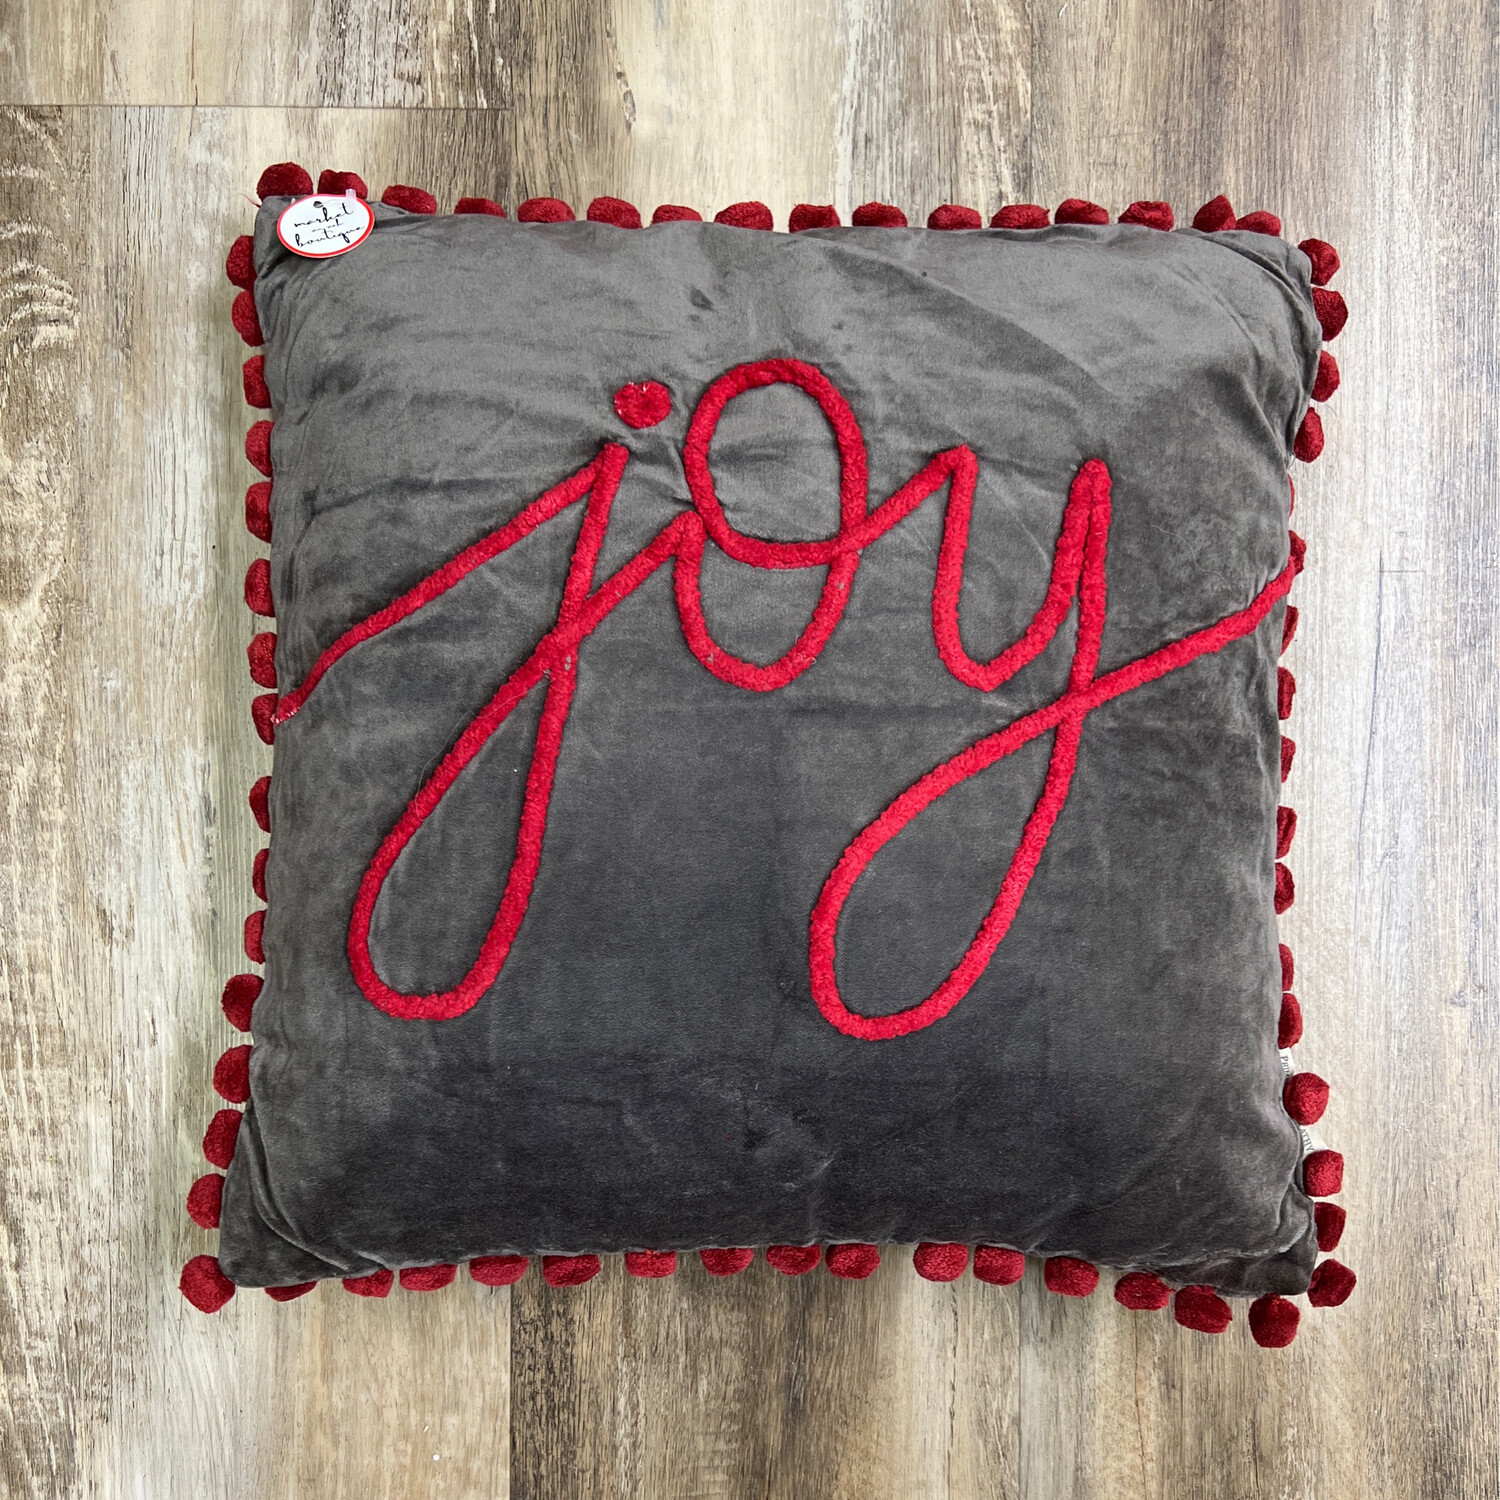 Embroidered Joy 20" Pillow